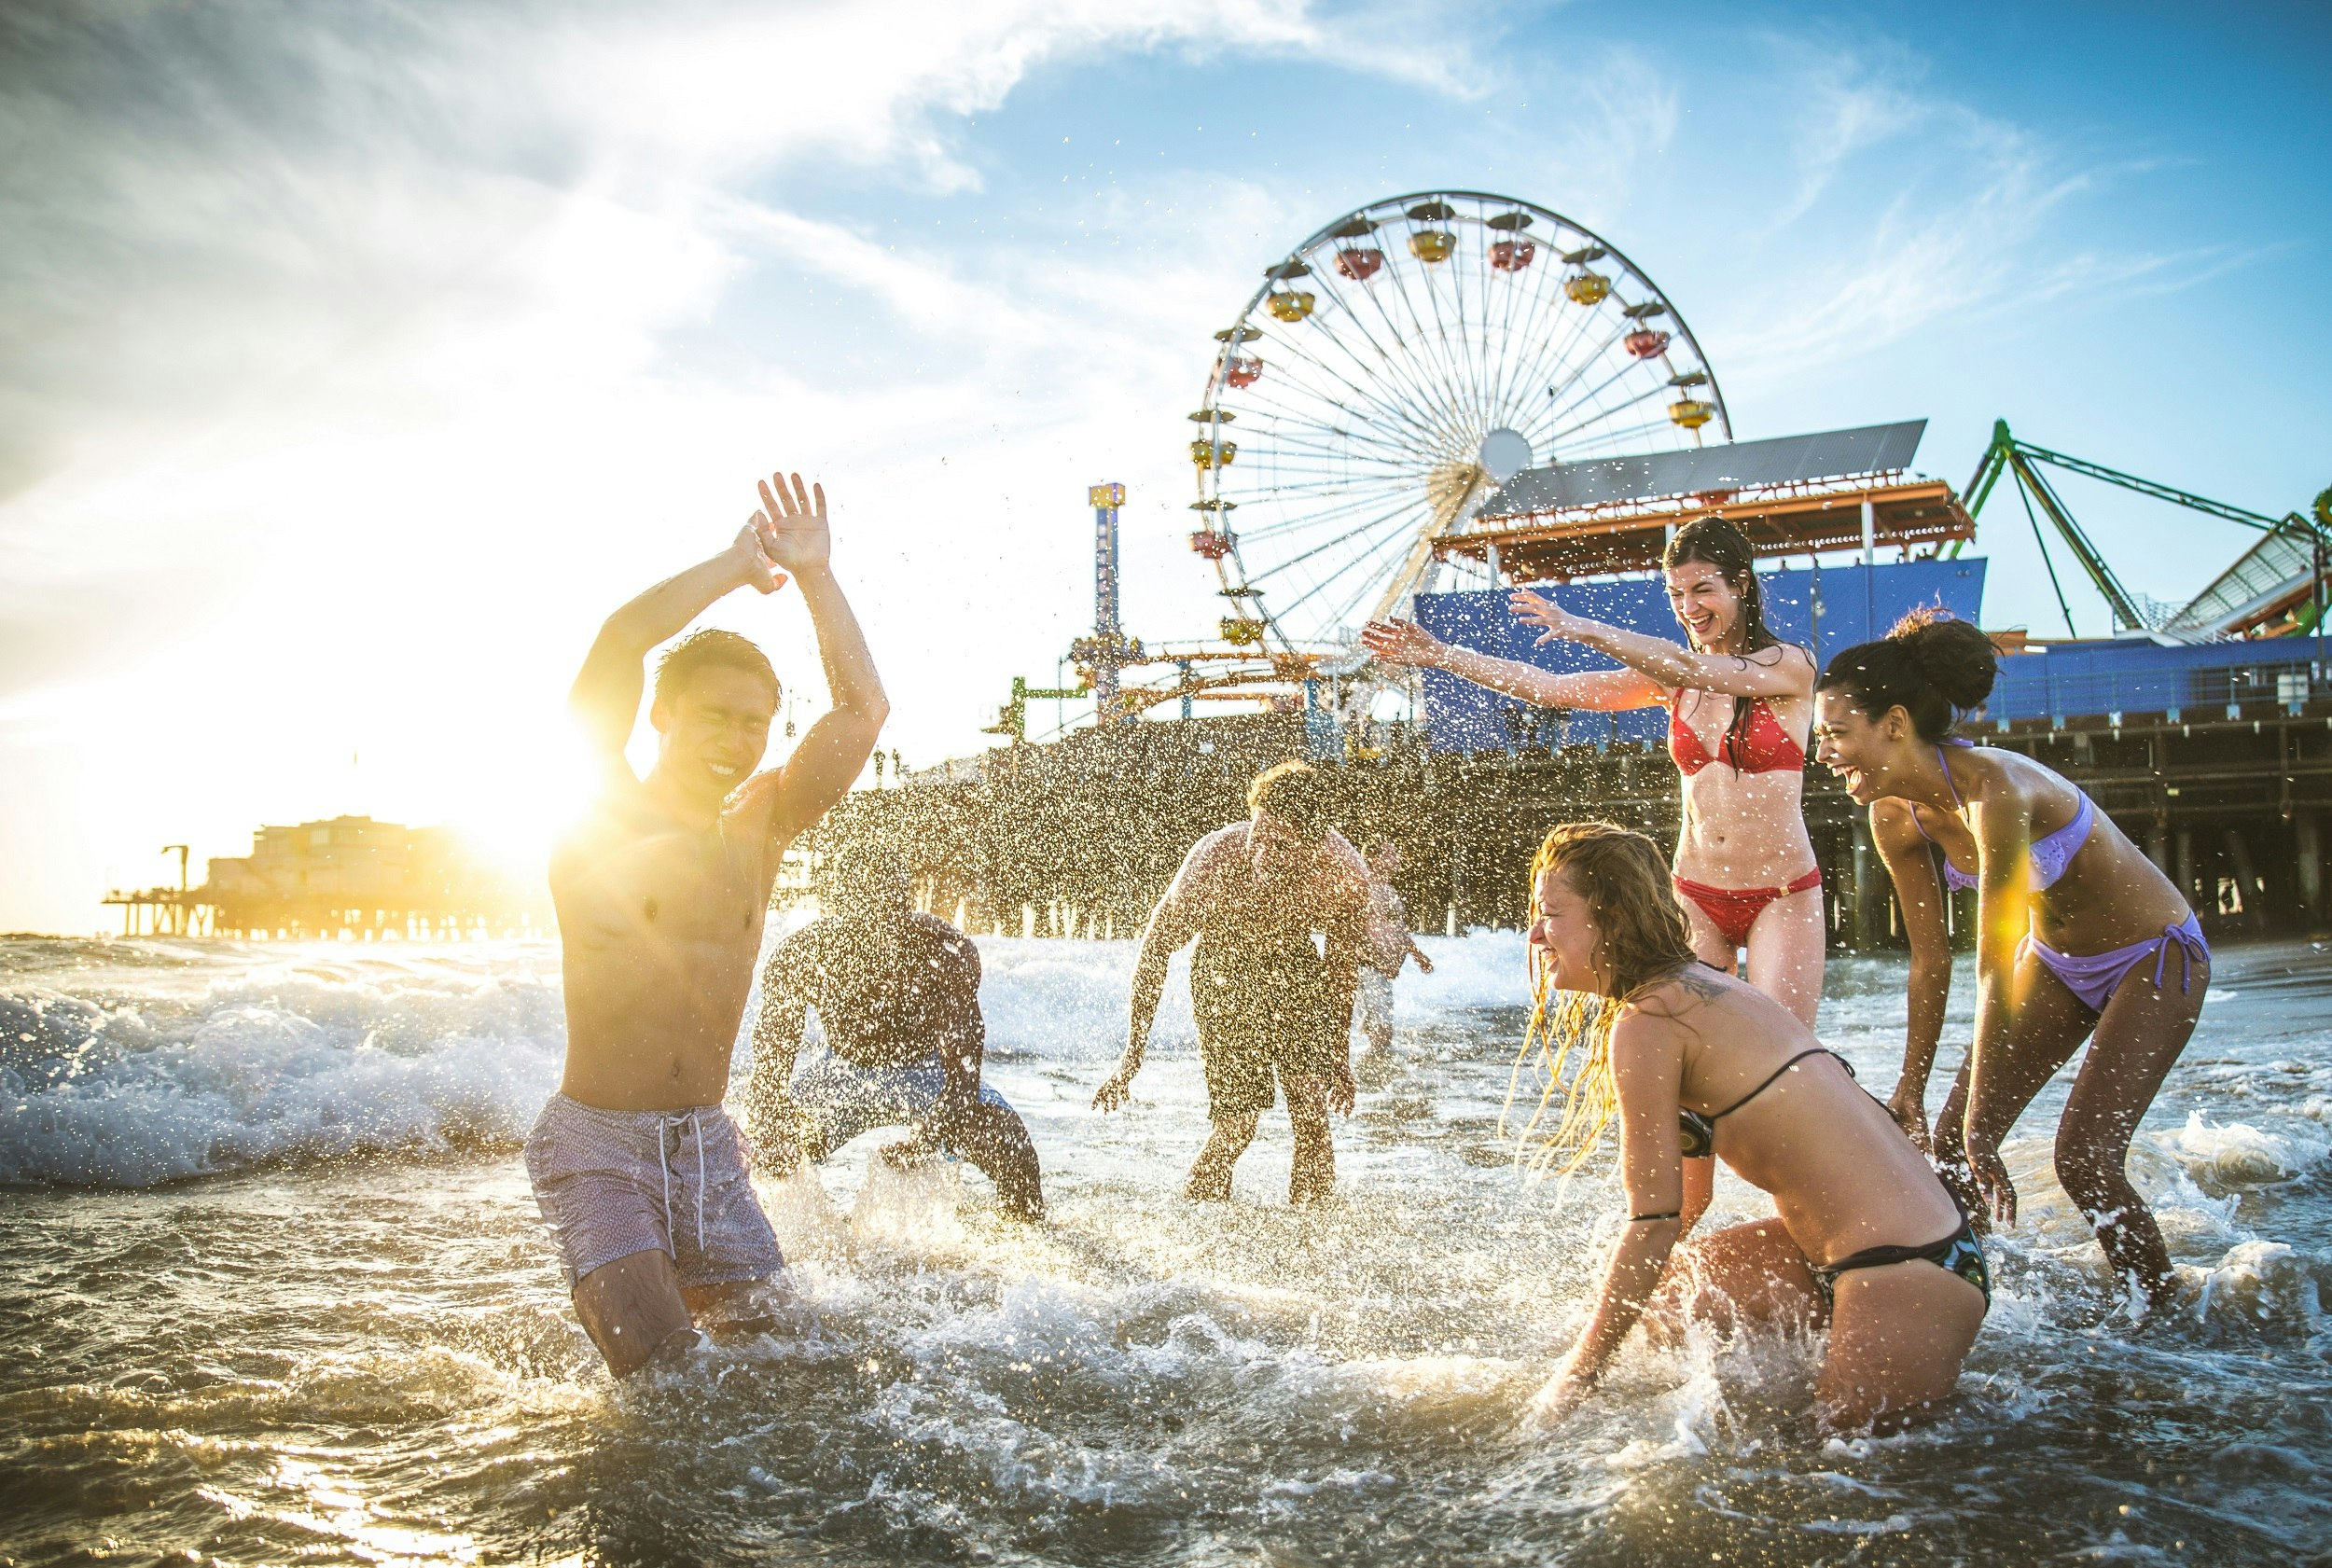 A group of young adults play in the surf, with the Santa Monica Pier ferris wheel in the background.